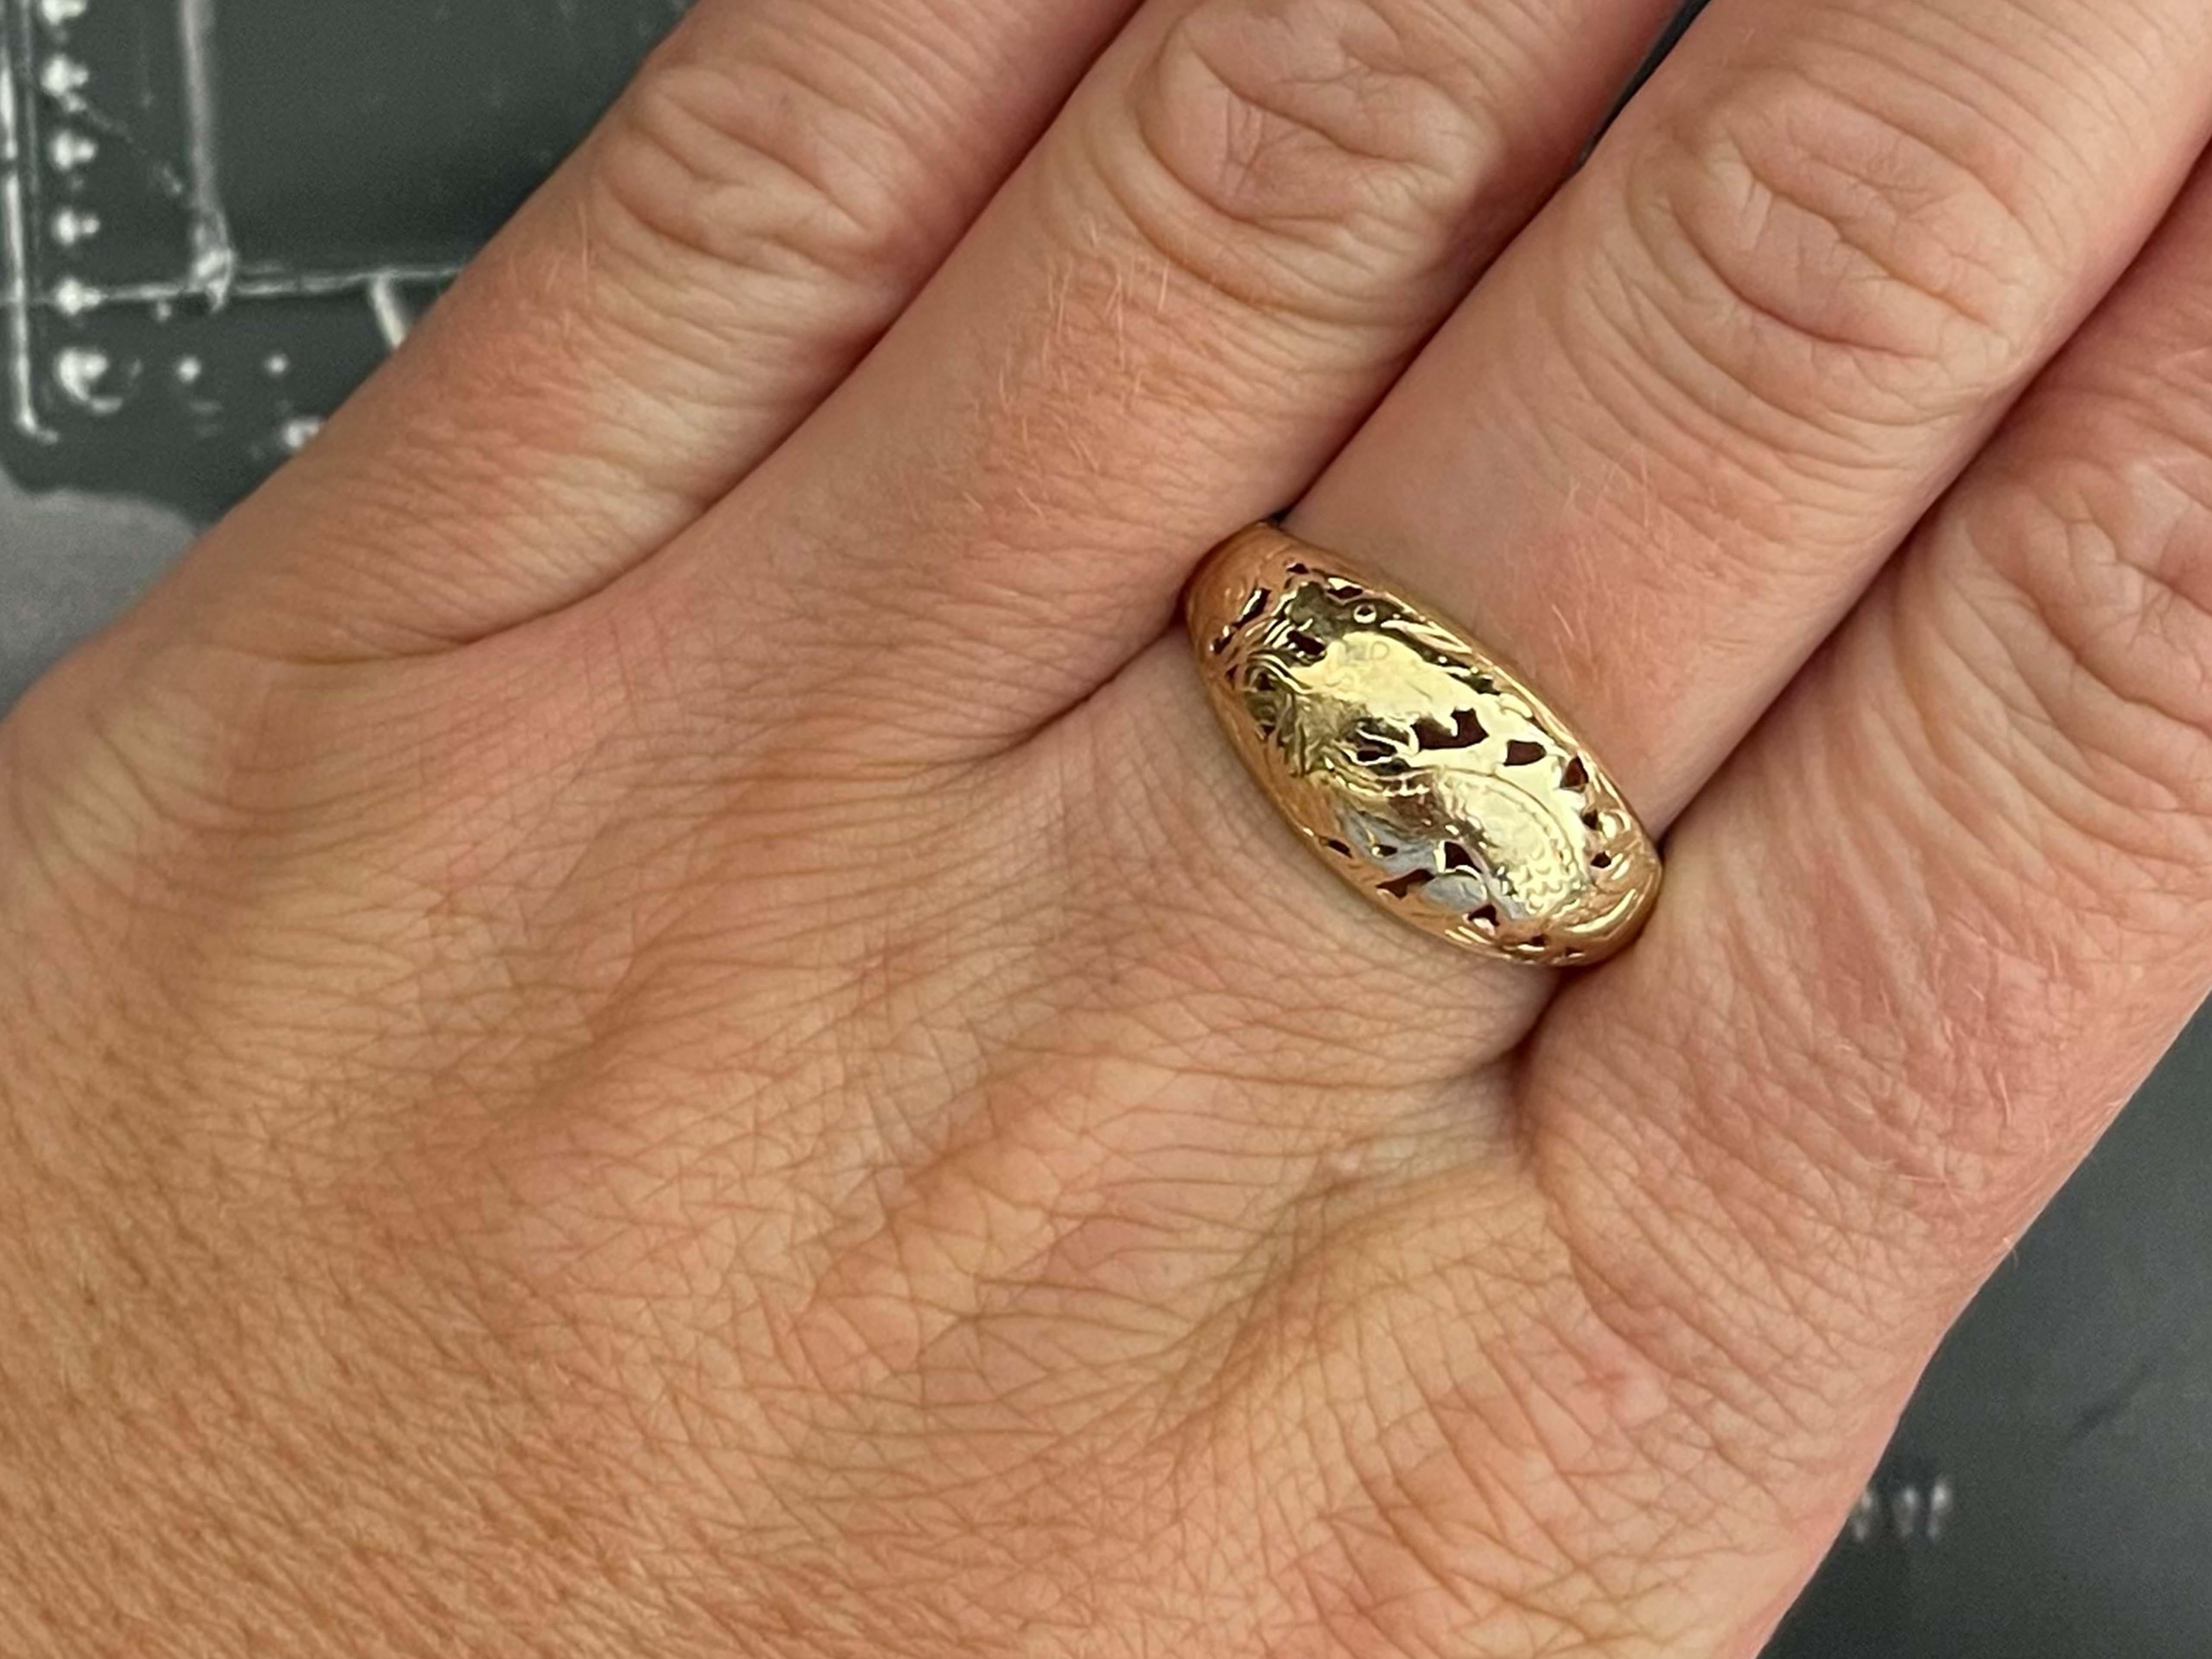 Ring Specifications:

Designer: Ming's

Metal: 14k Yellow Gold

Total Weight: 3.5 Grams

Ring Size: 9 (resizable)

Stamped: 